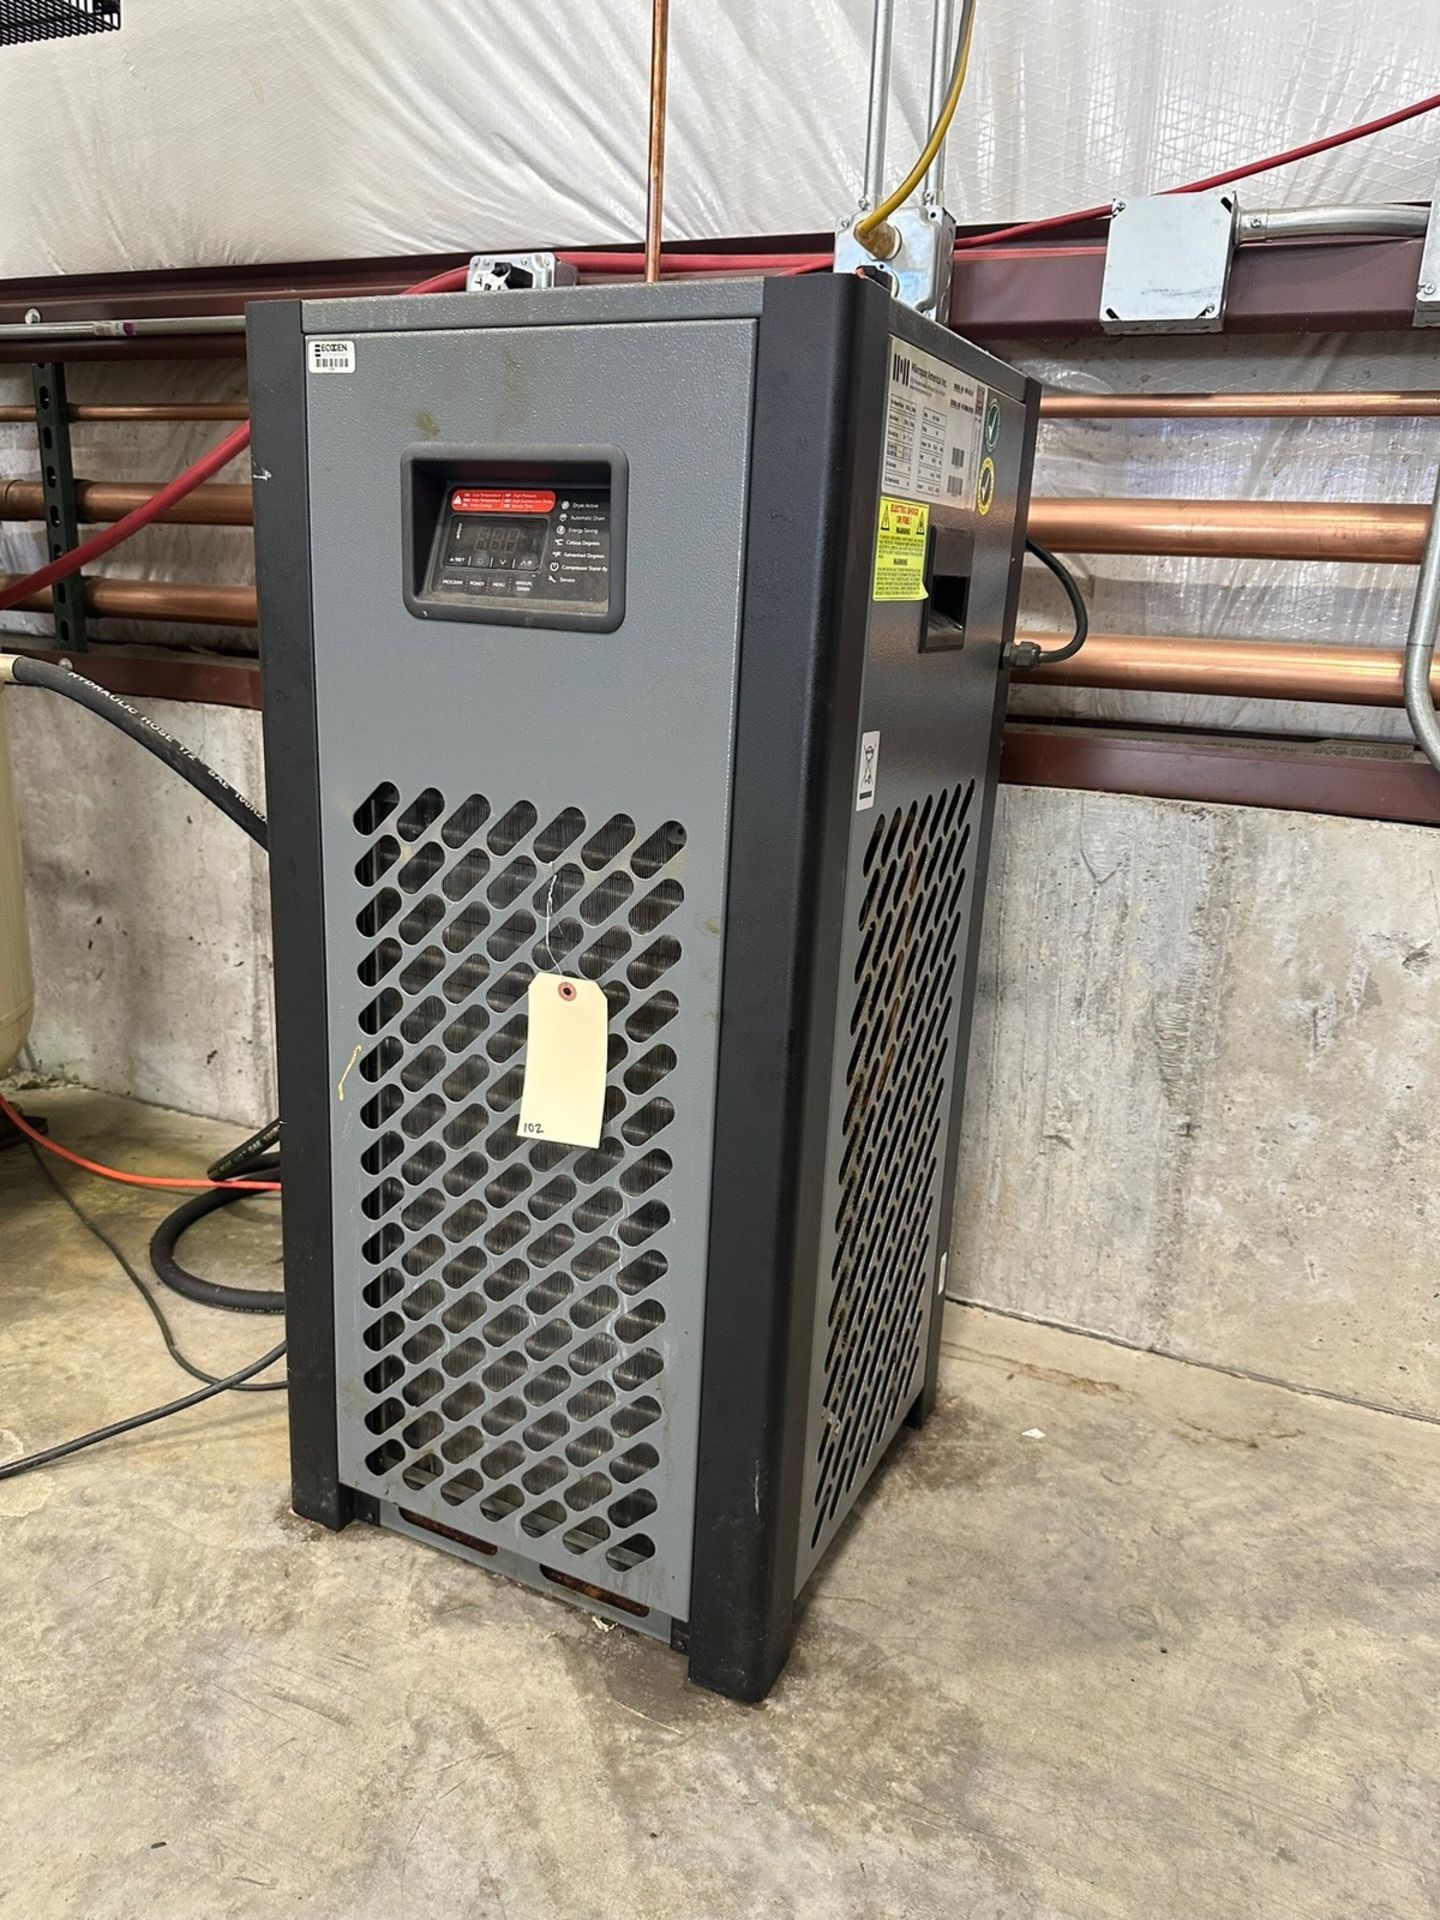 Mikropor America Chiller, Model MH-US-25, S/N 429MA18760 | Rig Fee $125